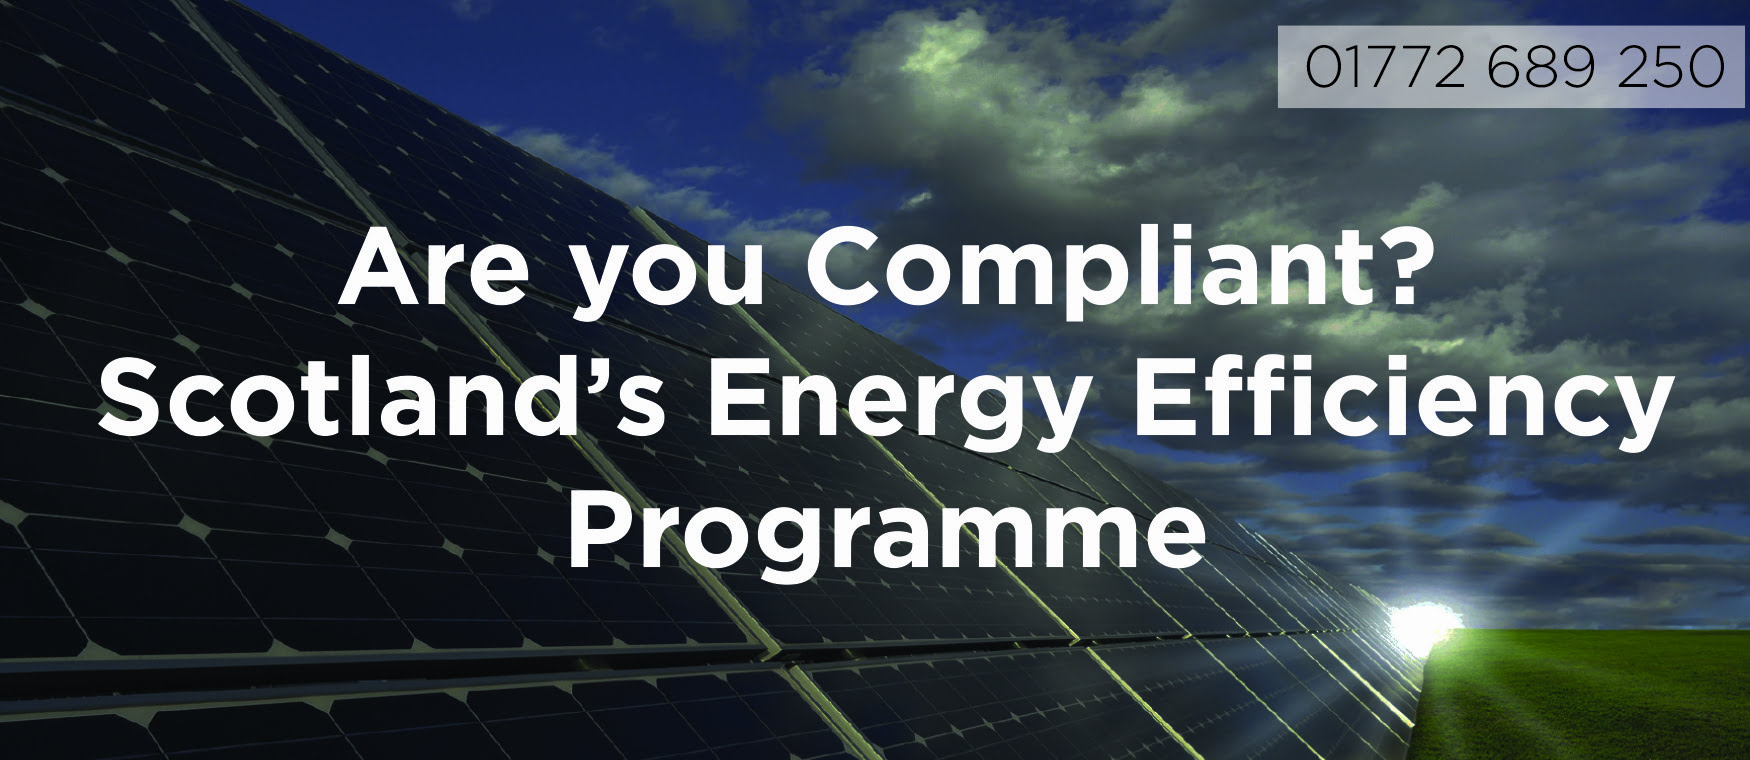 Are you compliant? Scotland's Energy Efficiency Programme